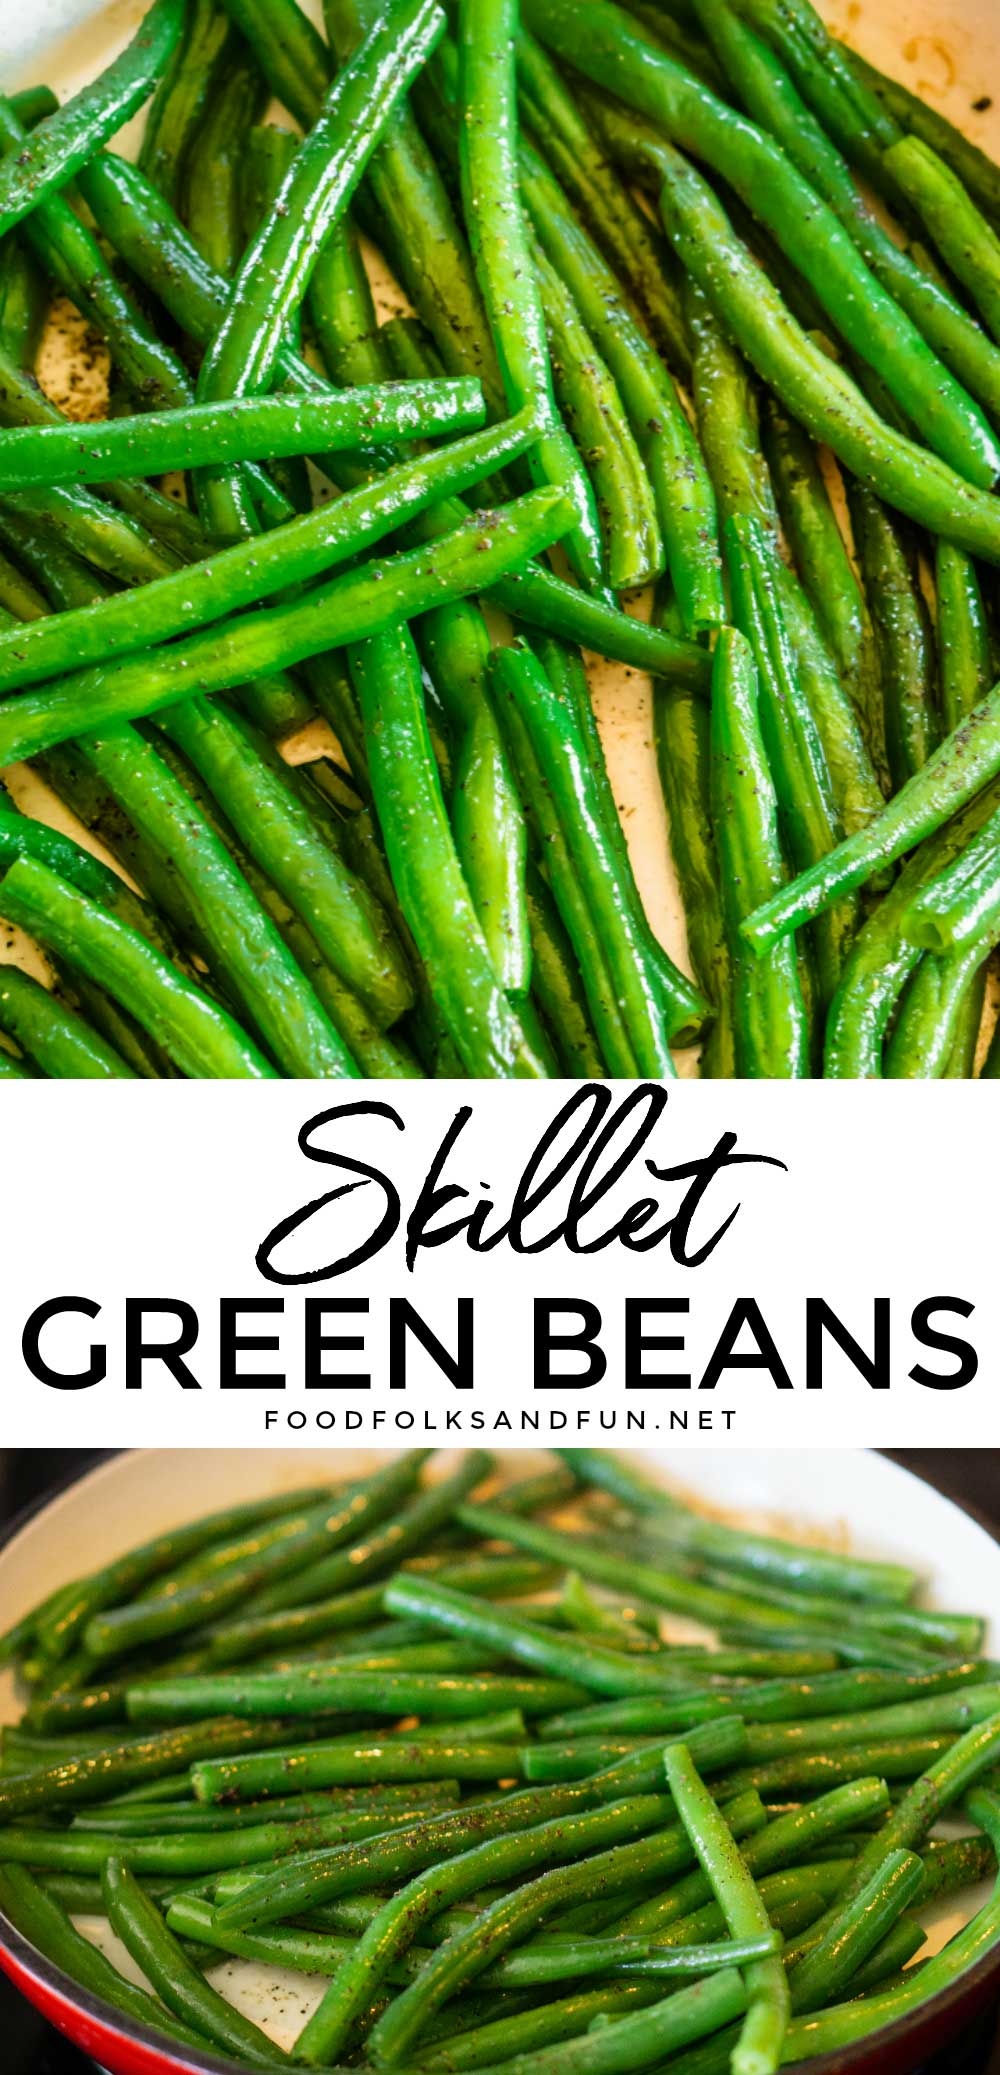 Proper Skillet Green Beans are just minutes away. See how to cook green beans in only 15 minutes plus seven different flavor variations! via @foodfolksandfun